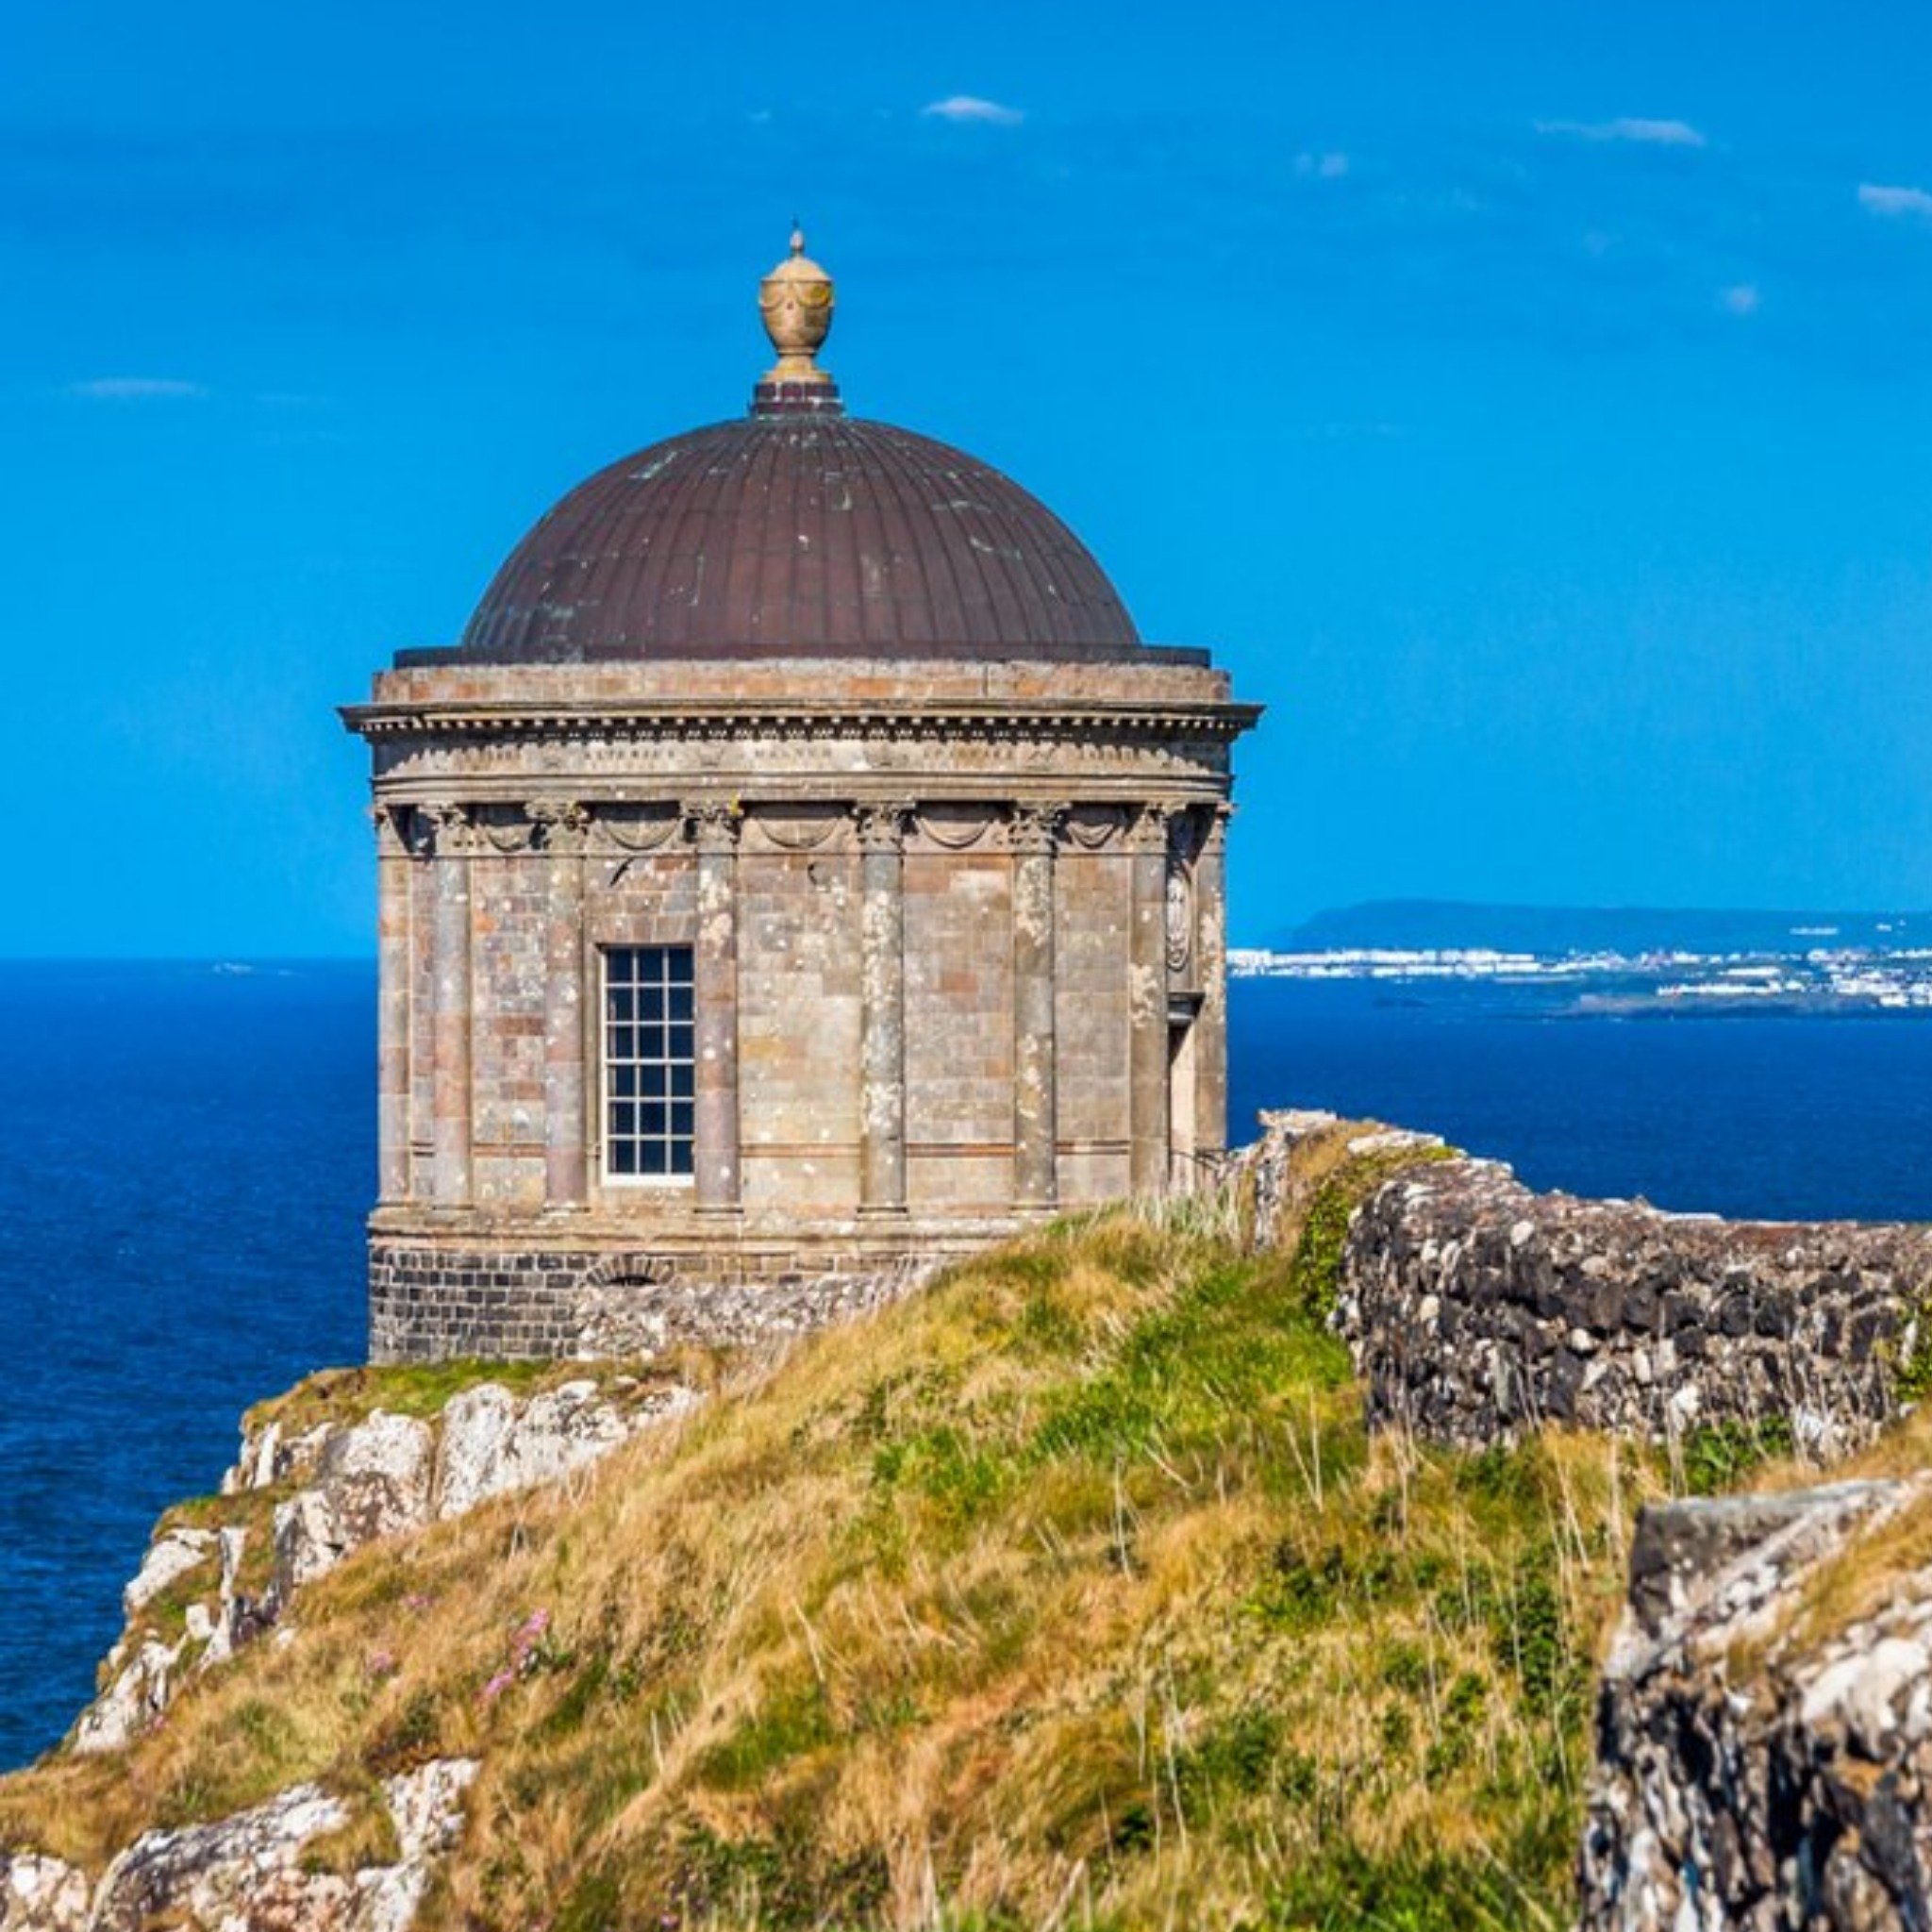 Moonpig Photographic The Mussenden Temple On The Cliffs Above The Atlantic Ocean, Large Card